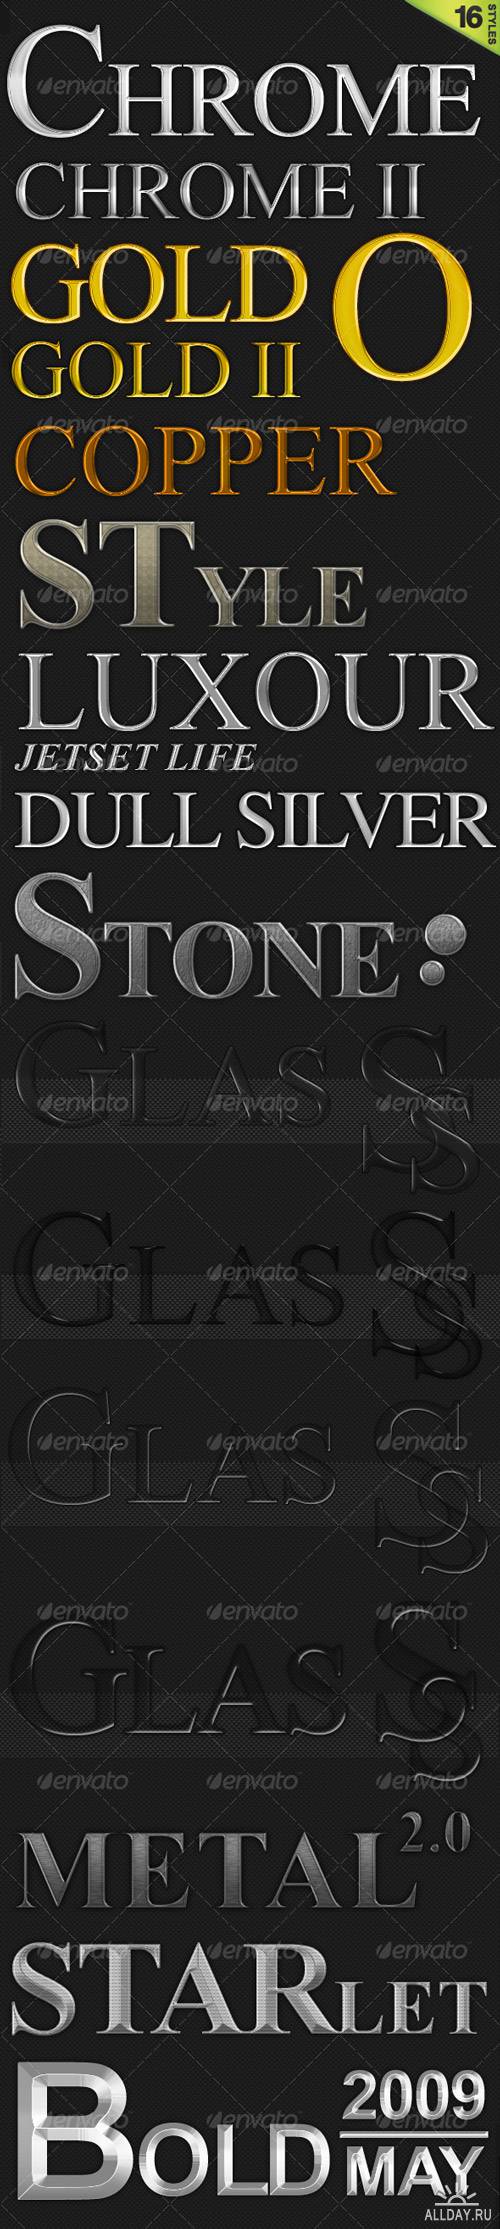 16 Quality Styles (Gold, Chrome, Glass and more) - GraphicRiver